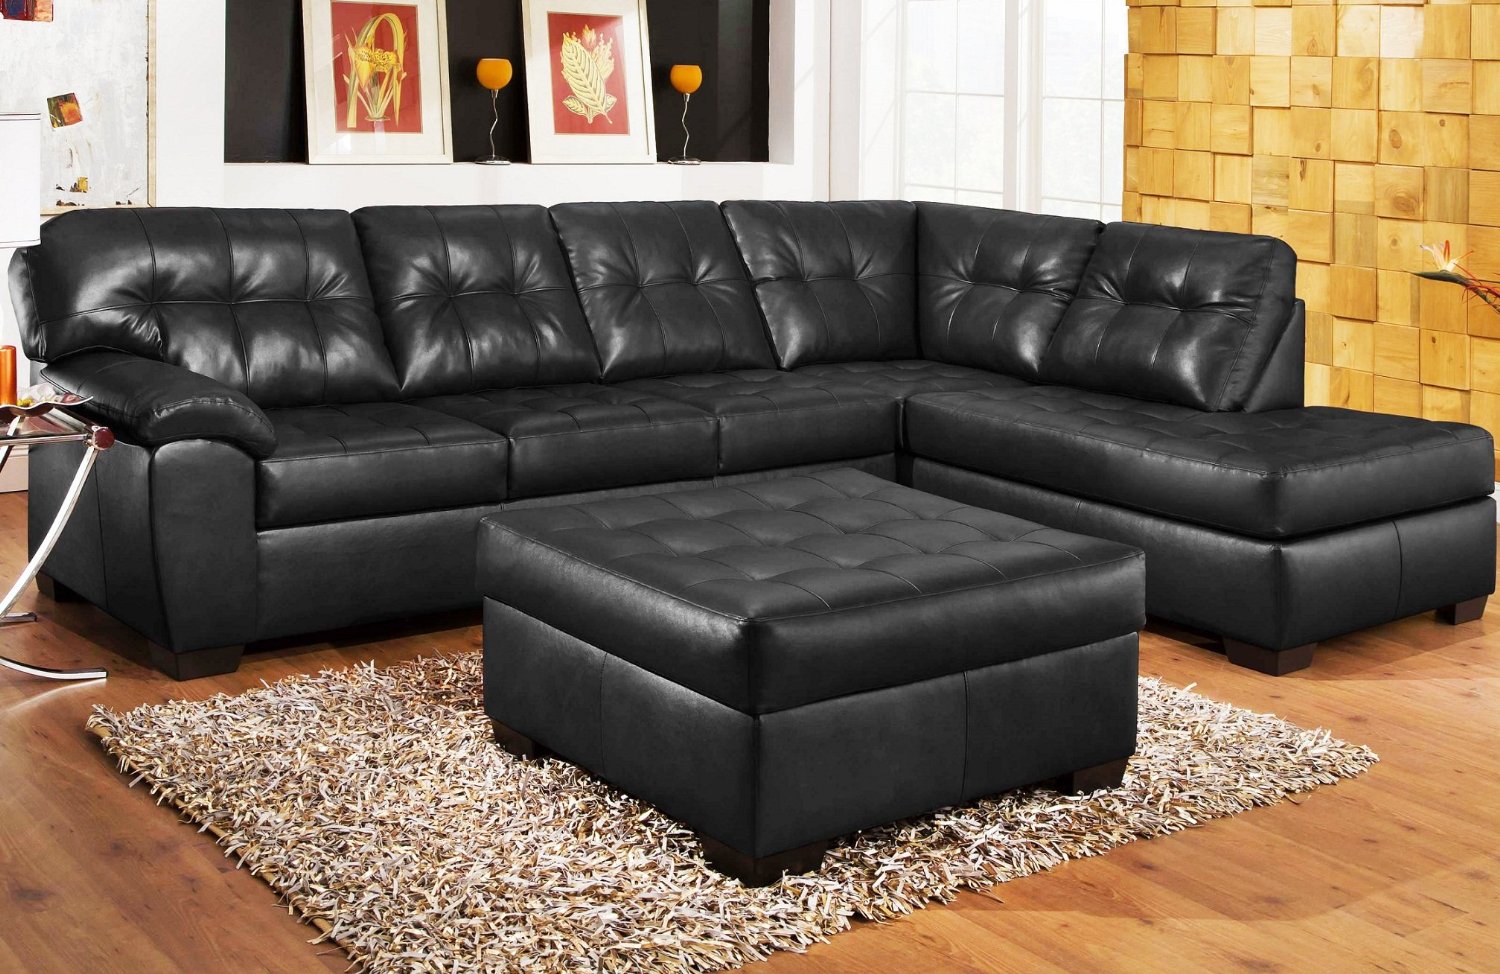 Modern Black Leather Sectional Sofa For Living Room Furniture Set With Fur Rug Laminated Wooden Floor Wooden Cube Wall Picture Wall Ideas Furniture + Accessories